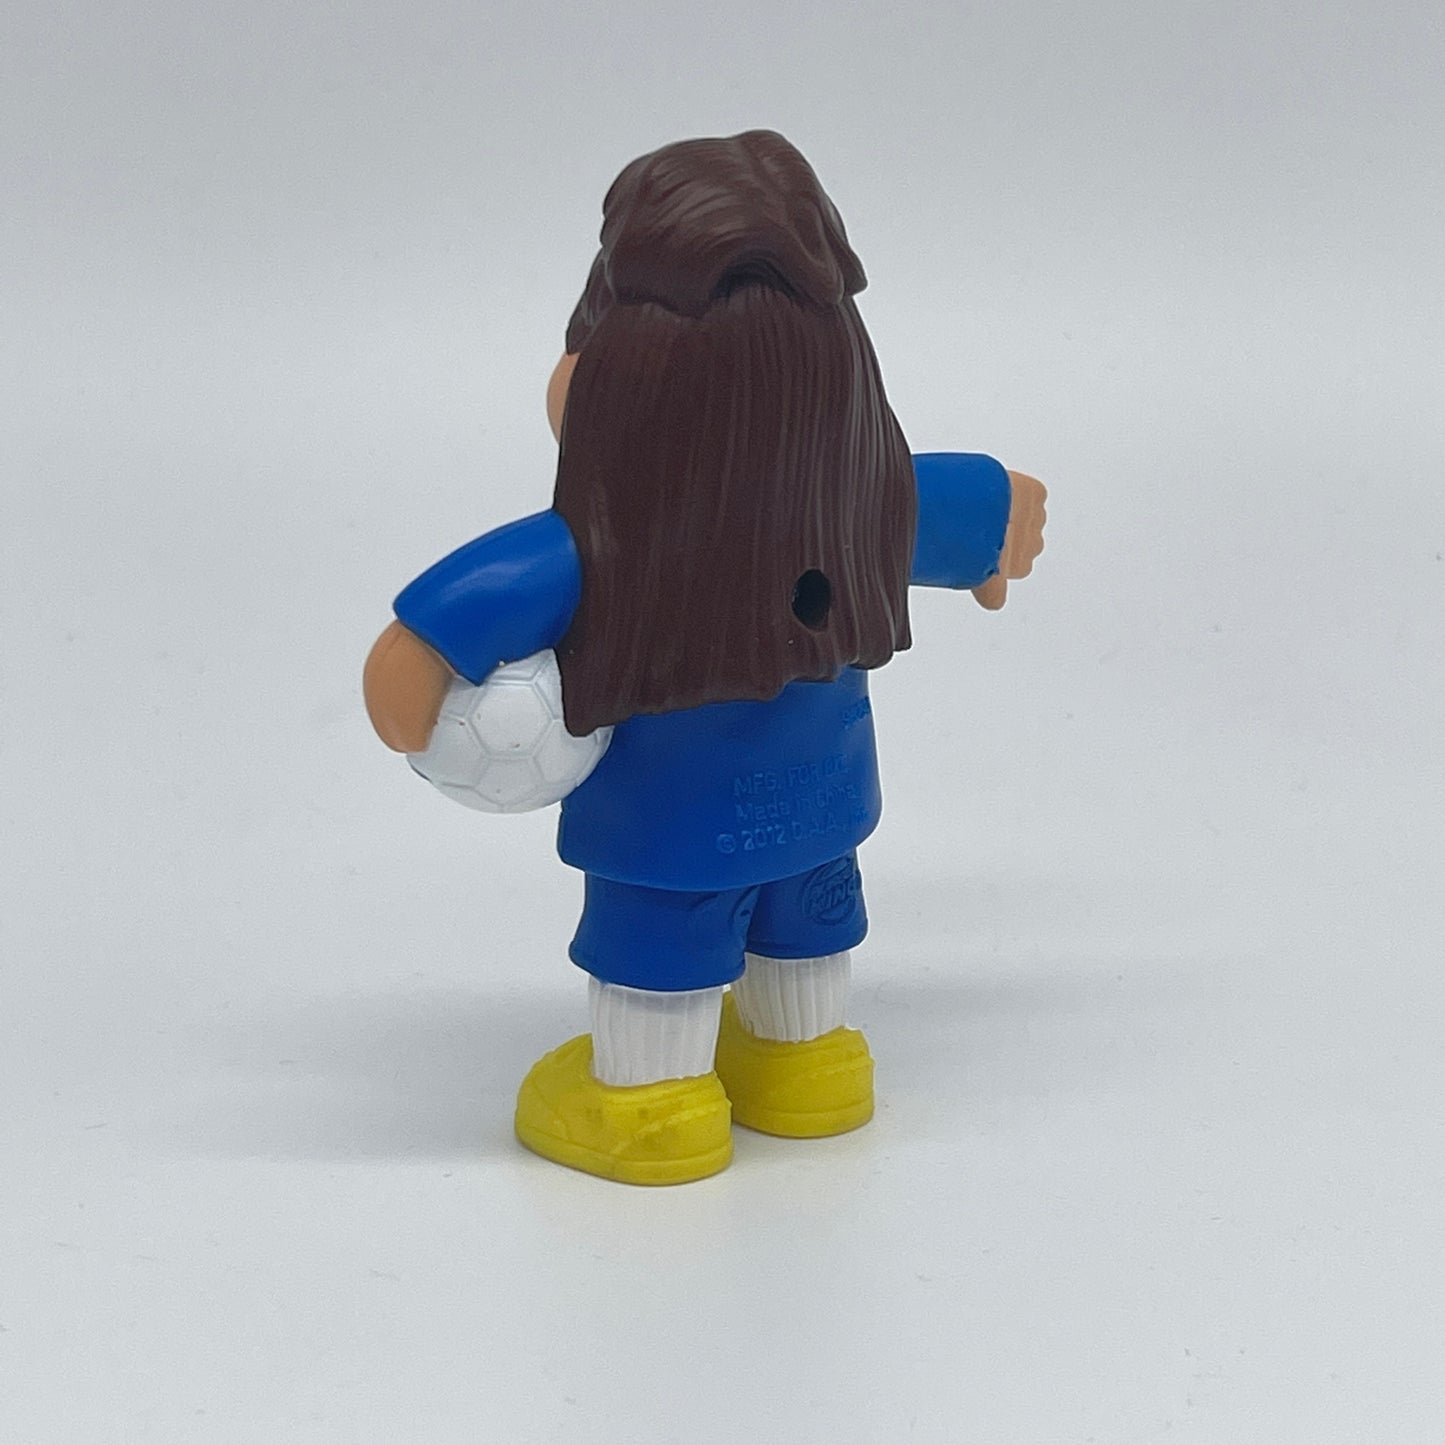 Burger King "Cabbage Patch Kids CPK Football" Jr. Meal Happy Meal (2012)